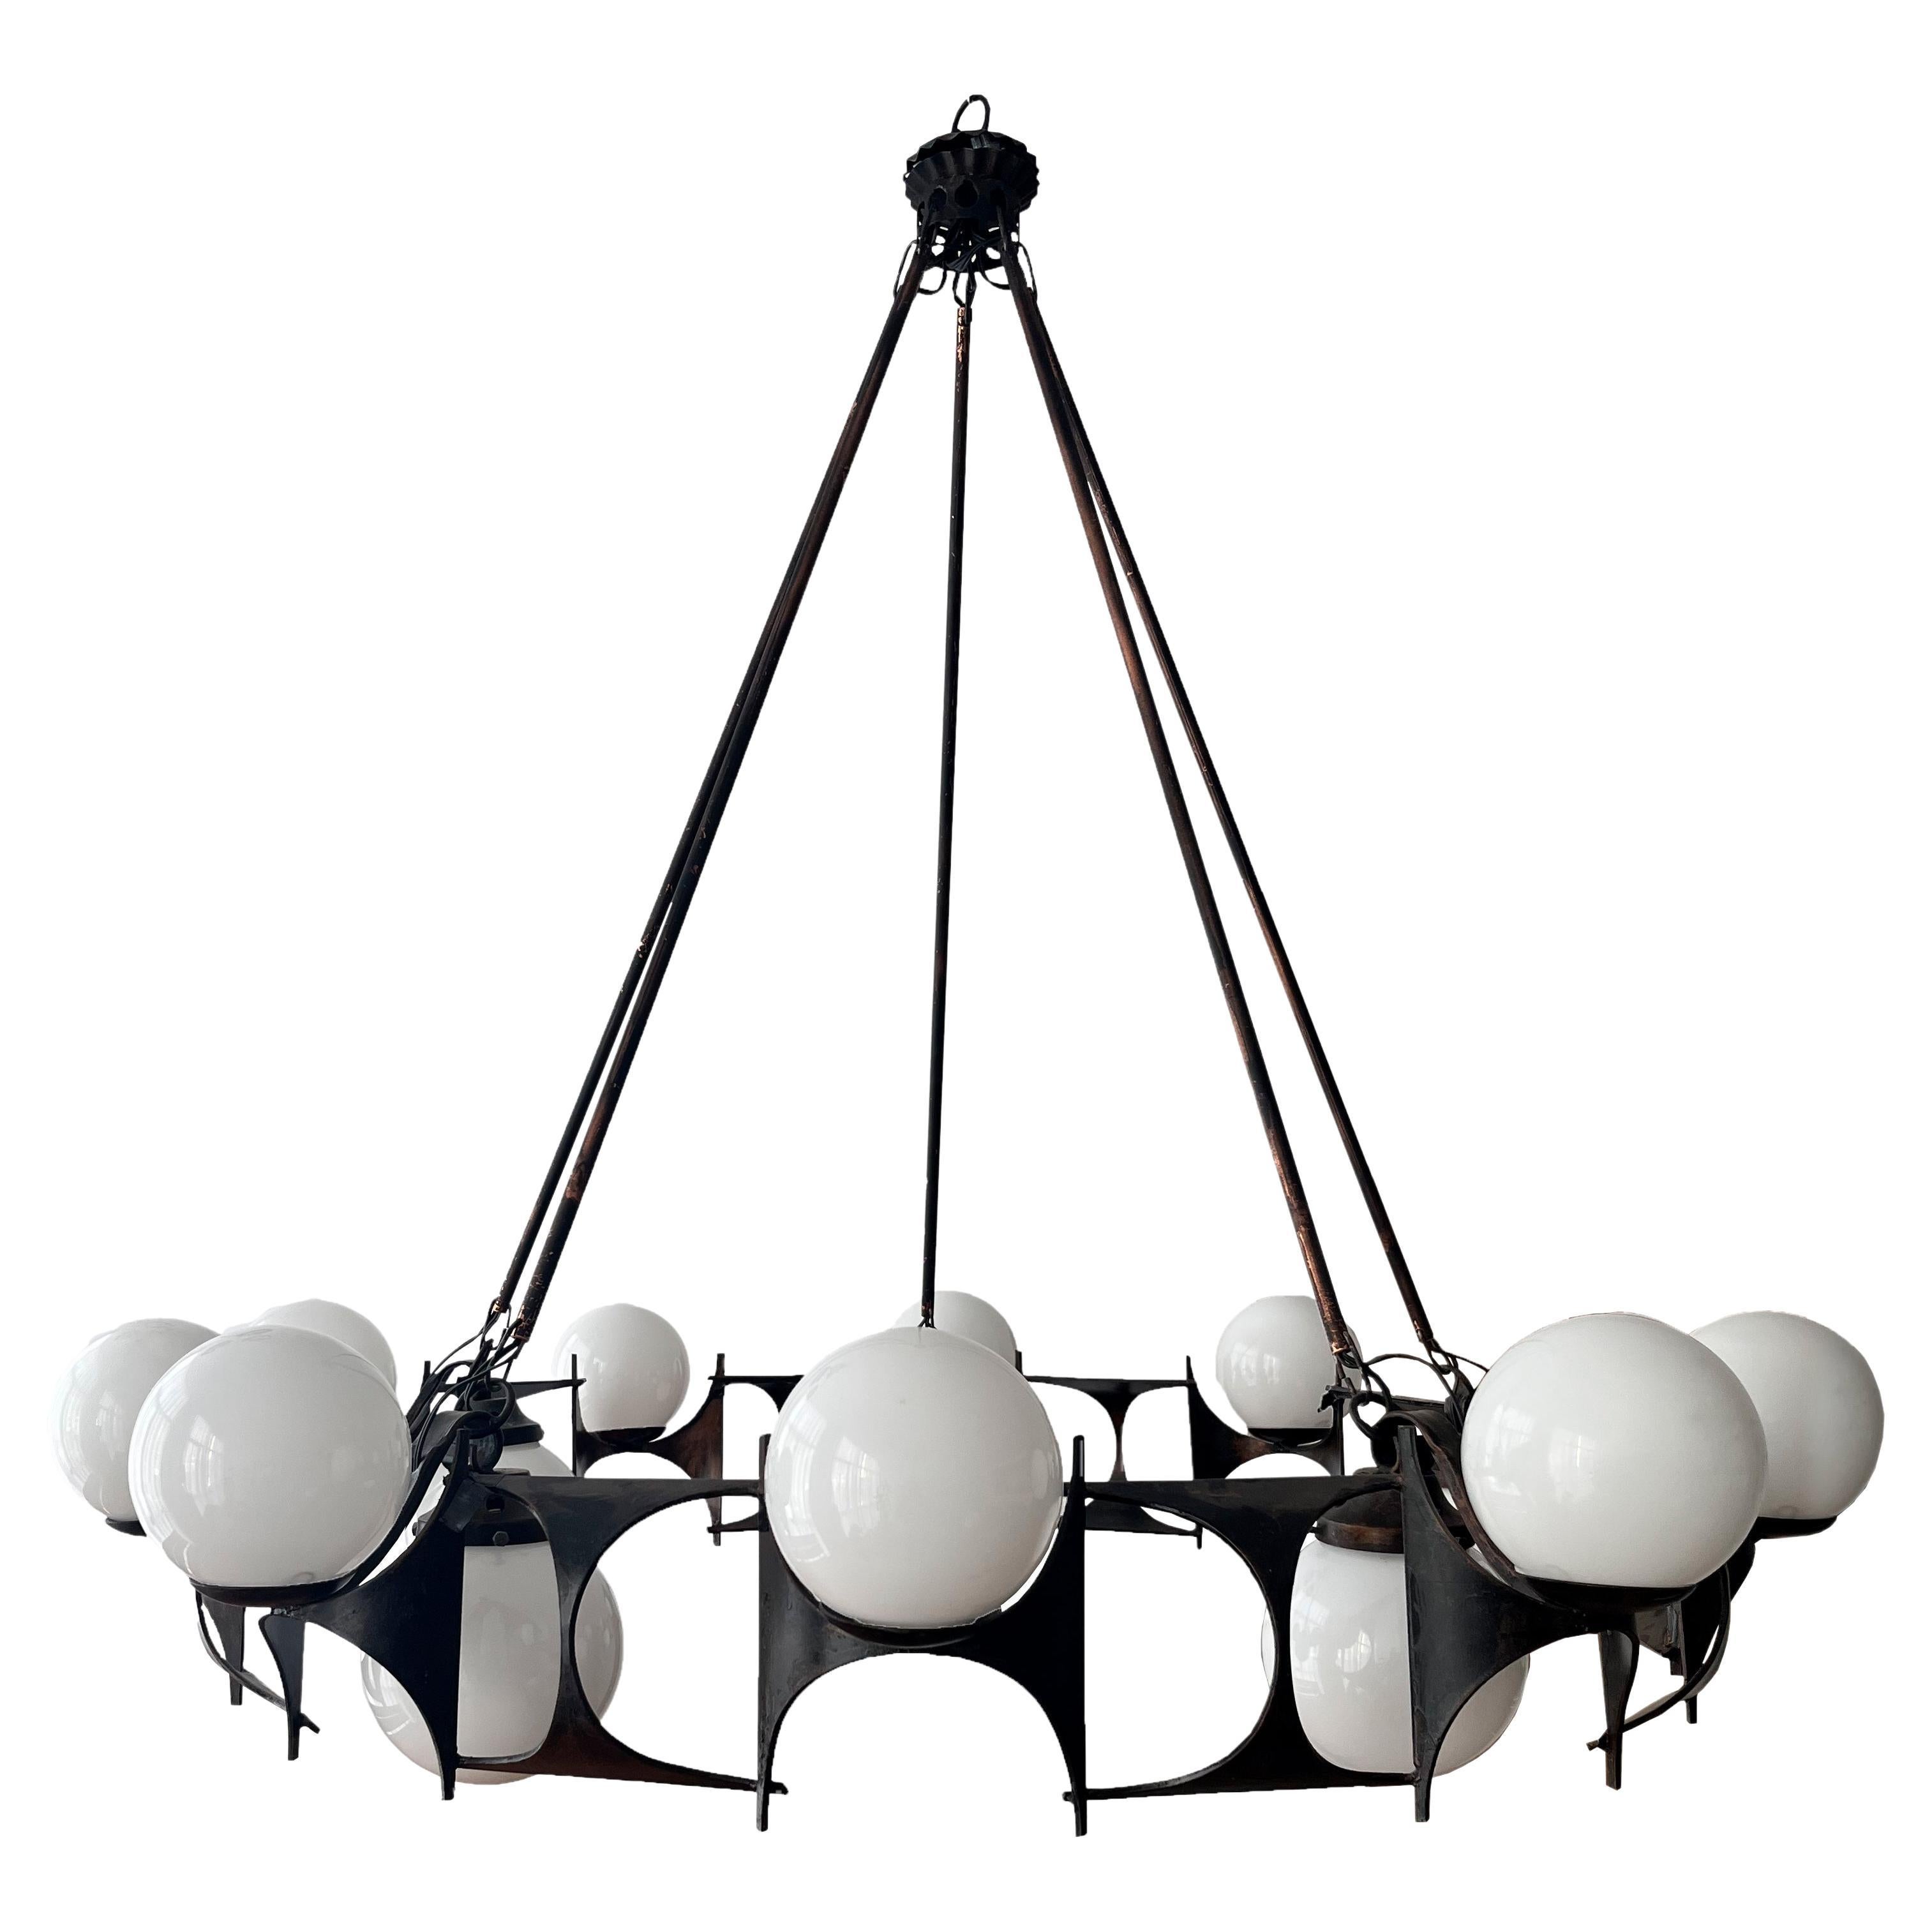 Brutalist Style Chandelier Lamp from the 1950s